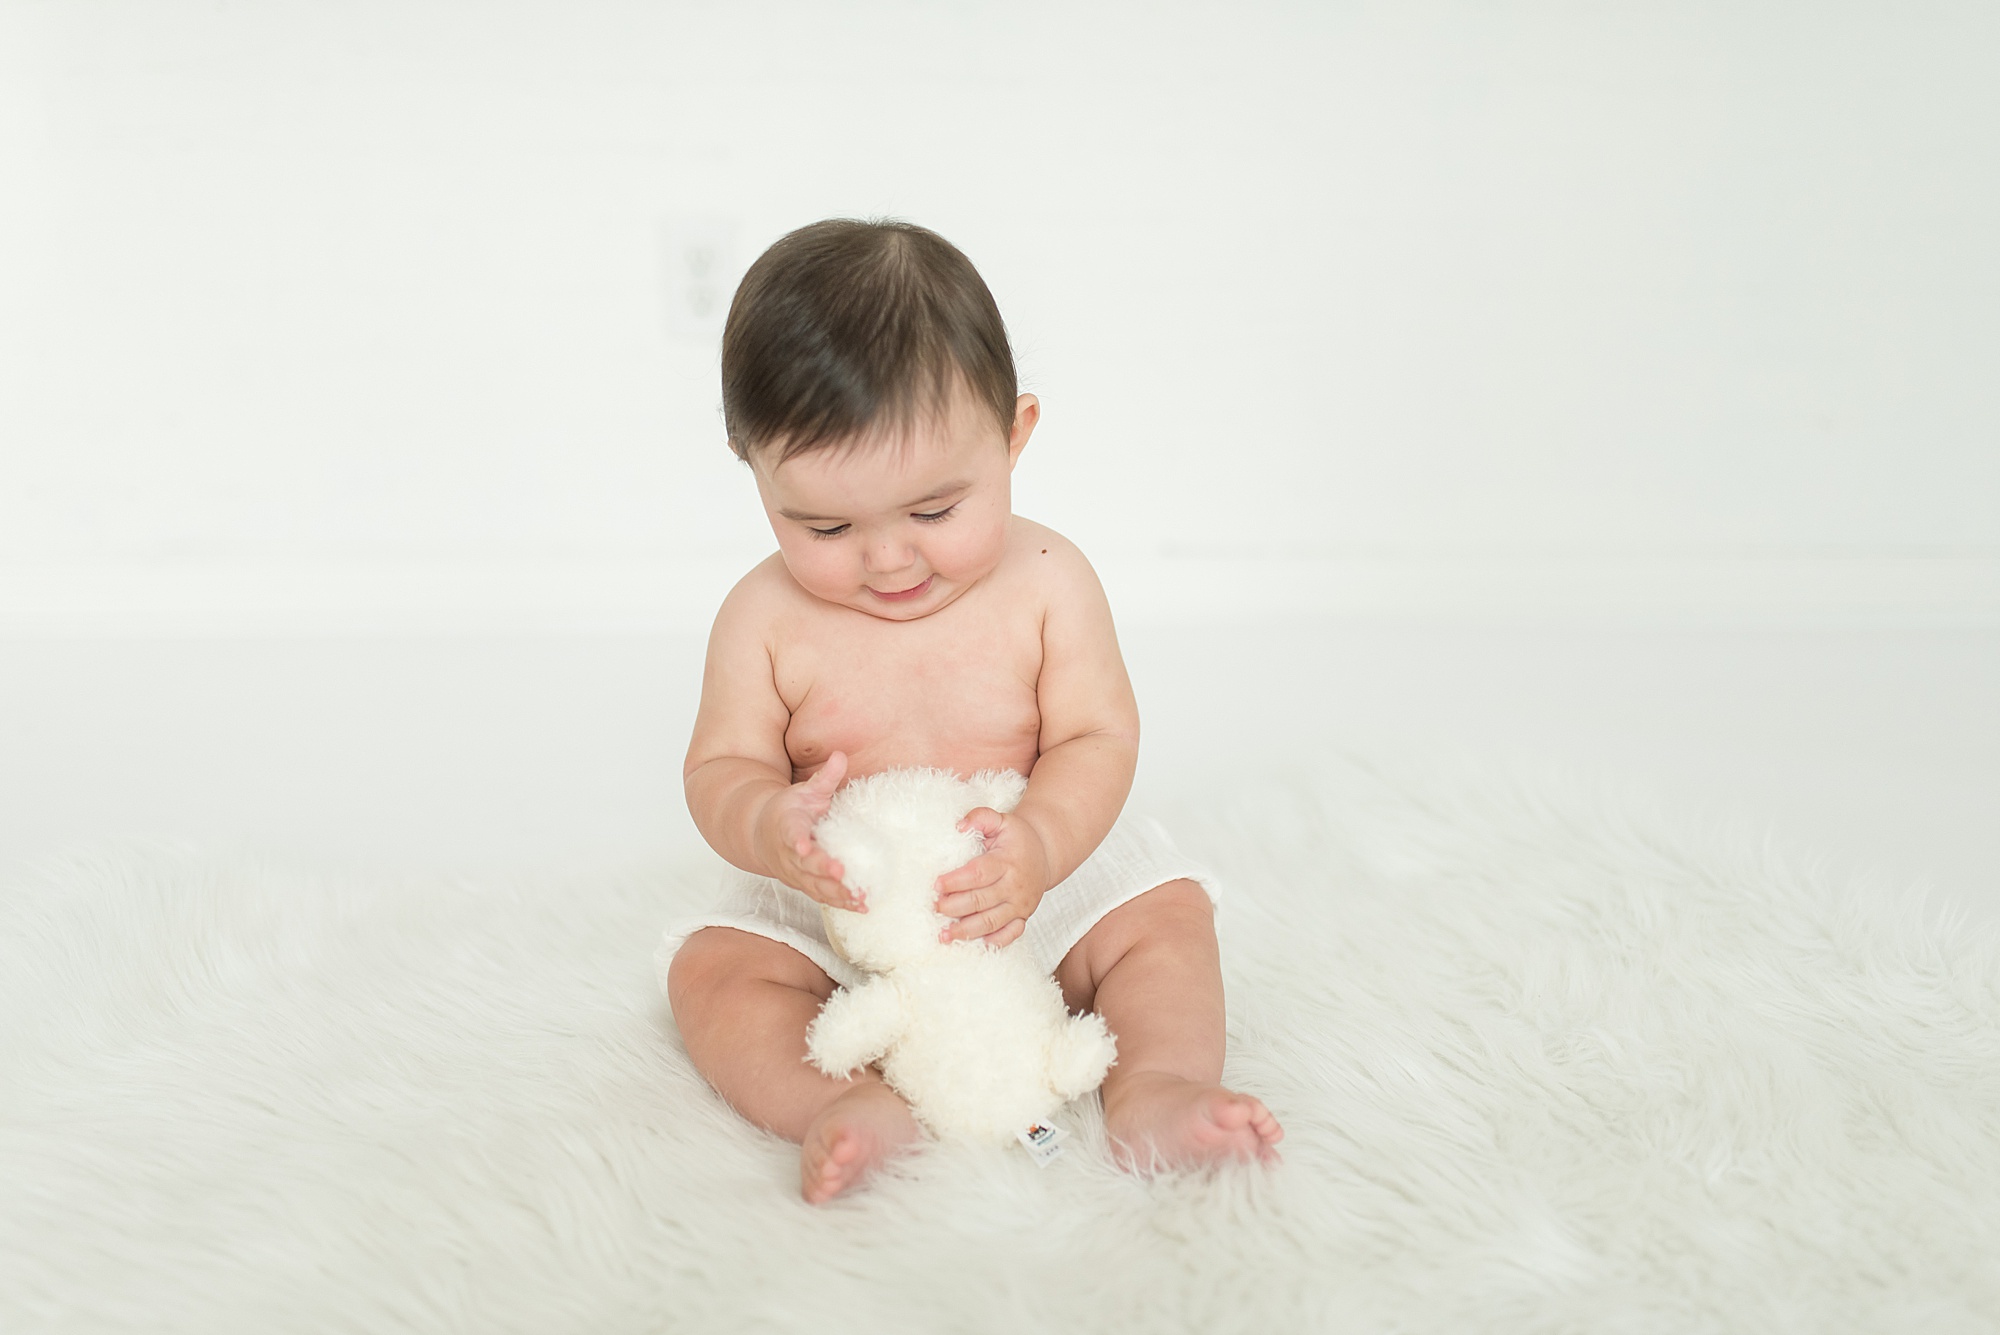 Little elm 6-month old plays with white stuffed animal